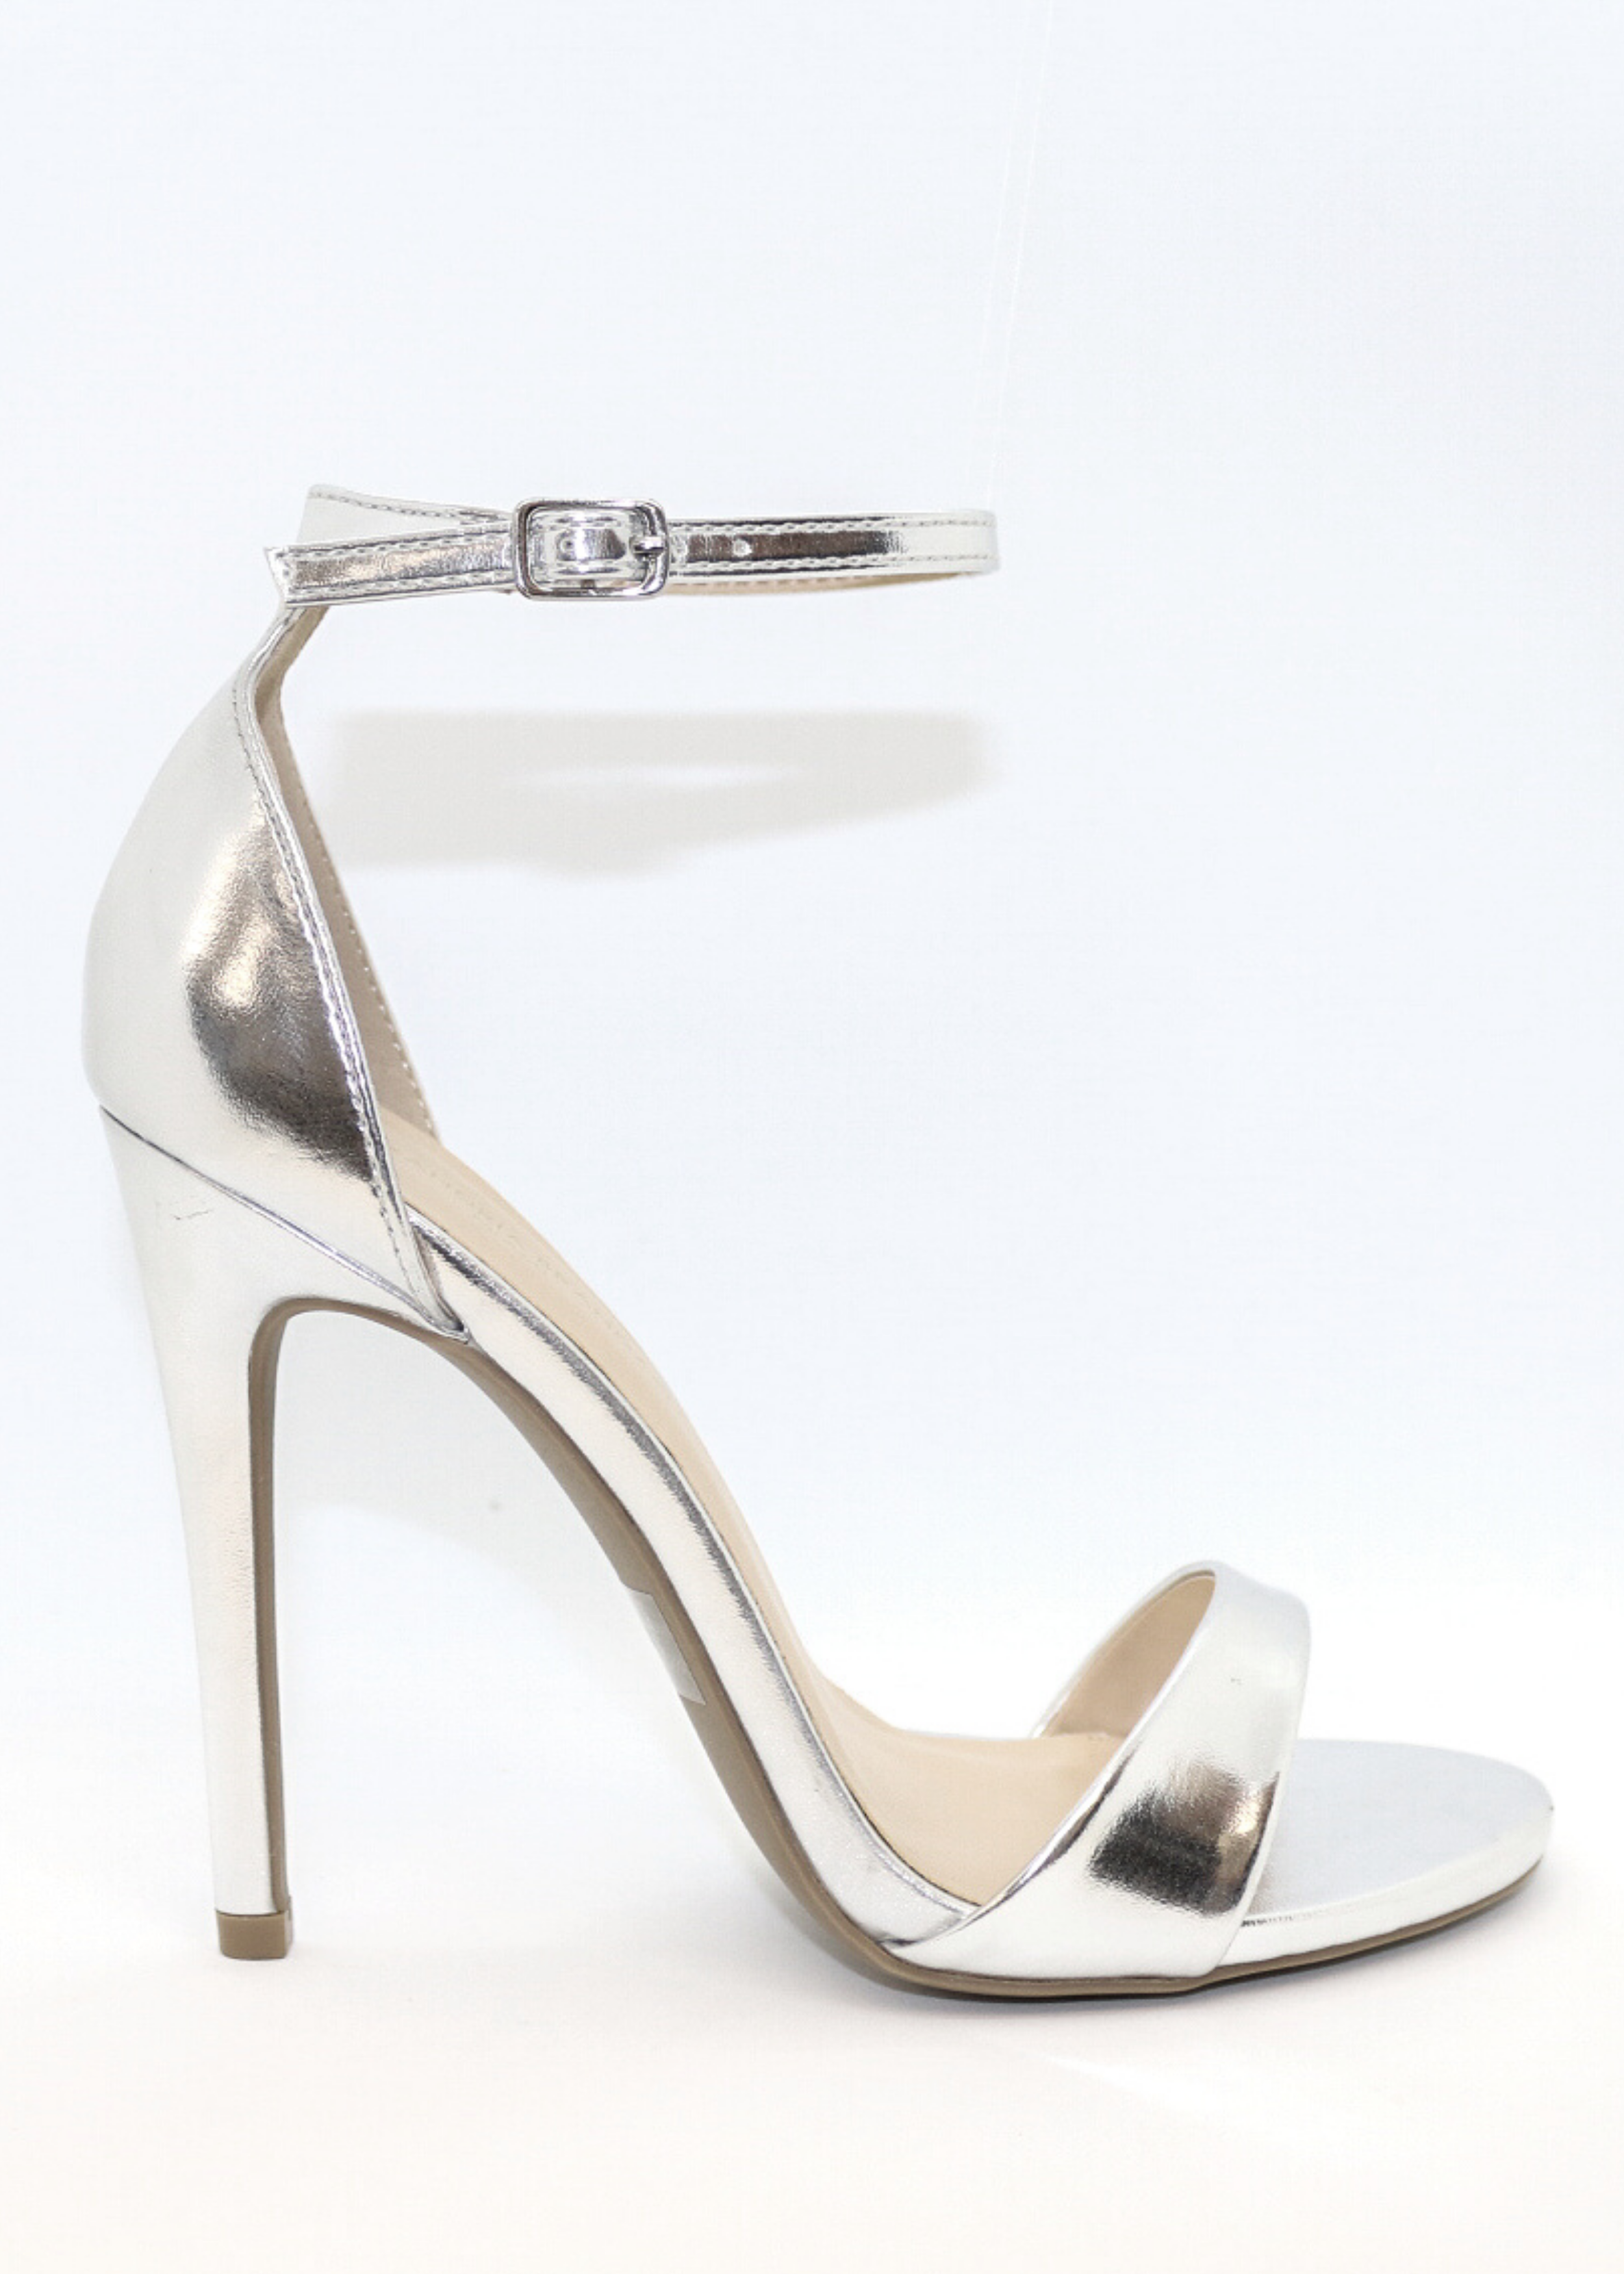 Ali Heels in Silver as the feet is propped on a marble table is the back ground. It is pictured on a side view as you see buckle around the ankle. Ali Heels in Silver is a heel that is covered in the back of the heel and has a thick to thin to thick strap in the front showing your toes.